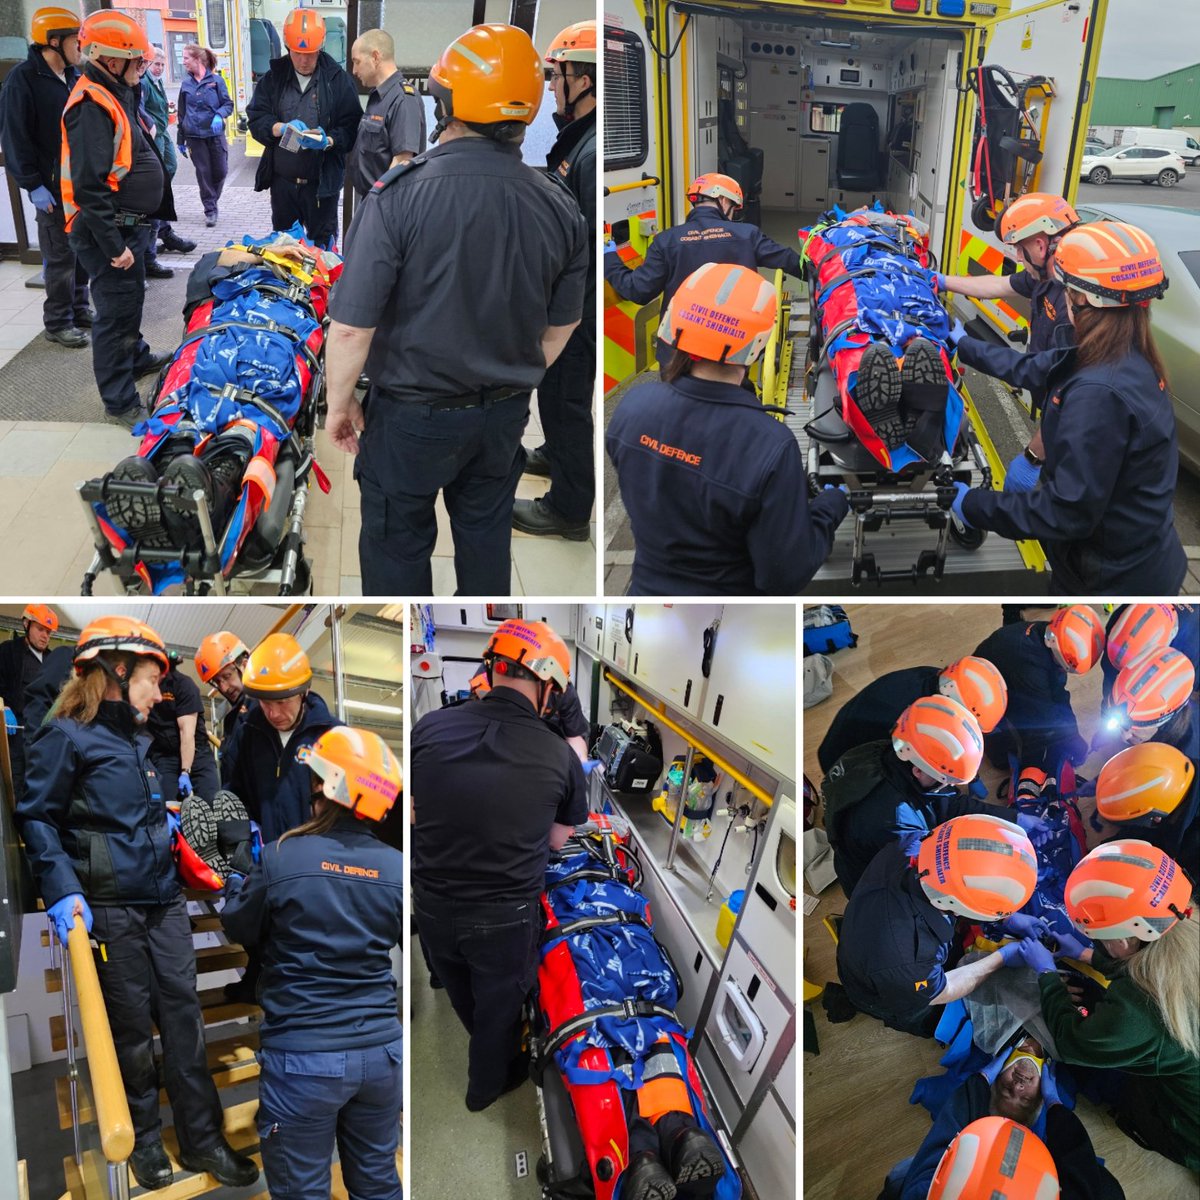 At our training session this week, a number of our volunteers took part in a casualty treatment and extrication exercise. Some of the skills practiced included patient assessment, seizure management, spinal injury management, patient transport, and handover. @CivilDefenceIRL